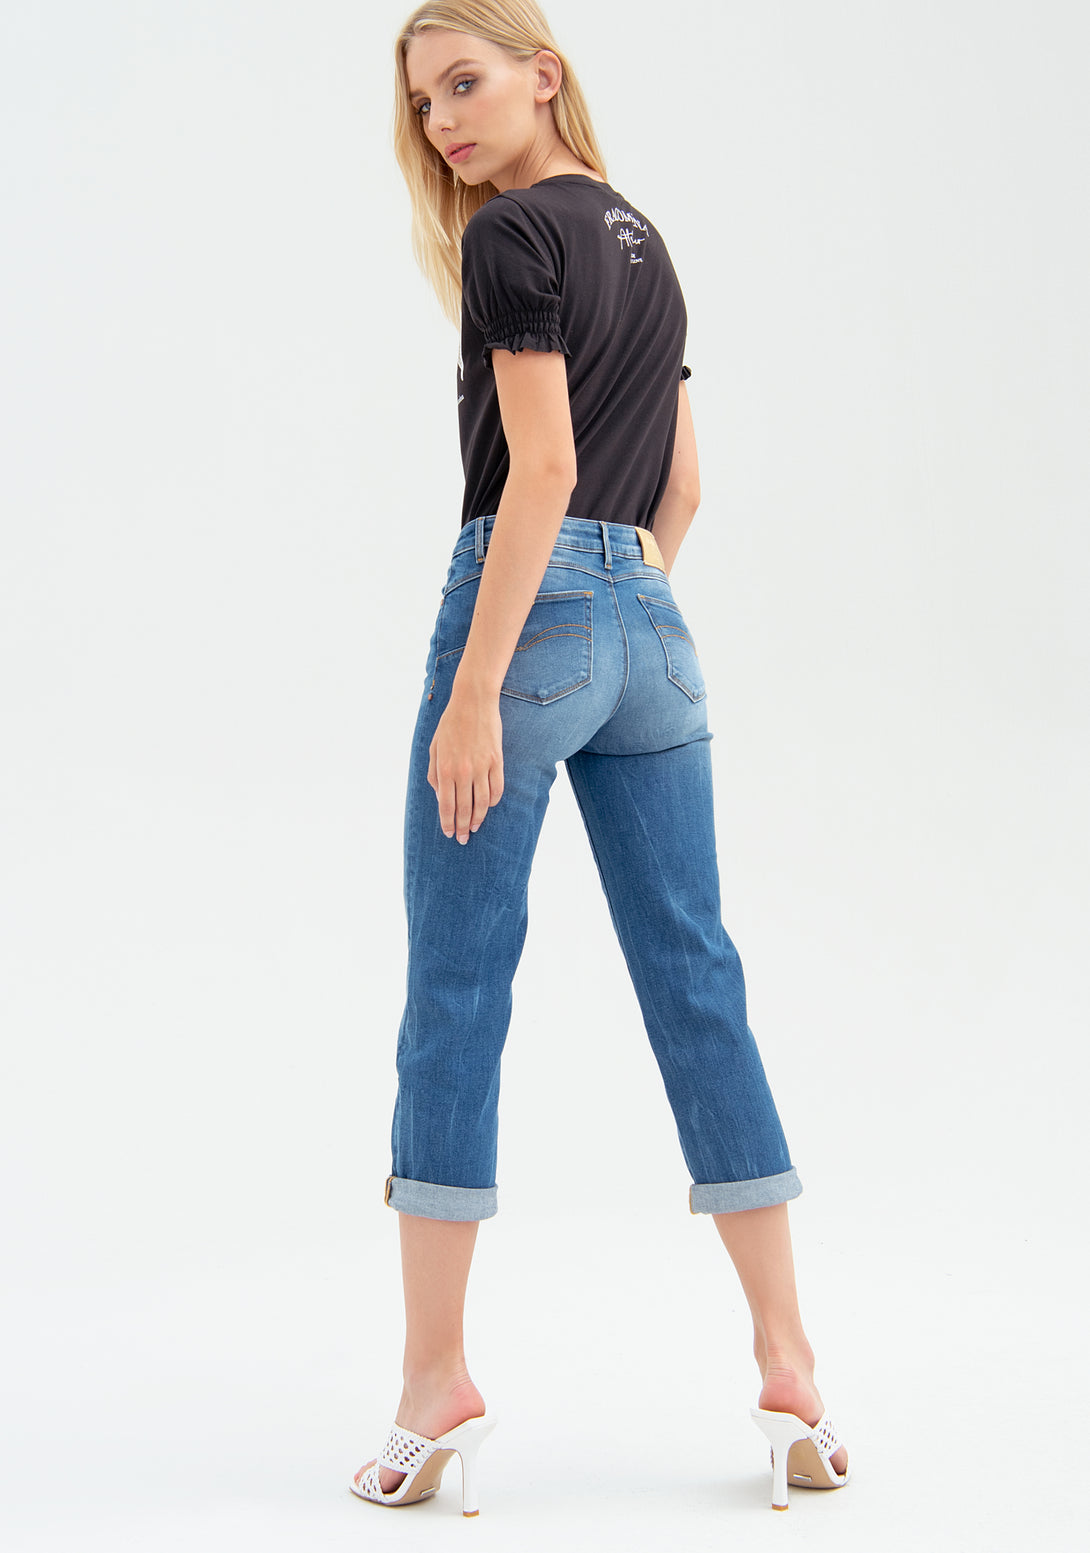 Jeans boyfriend fit cropped made in denim with middle wash